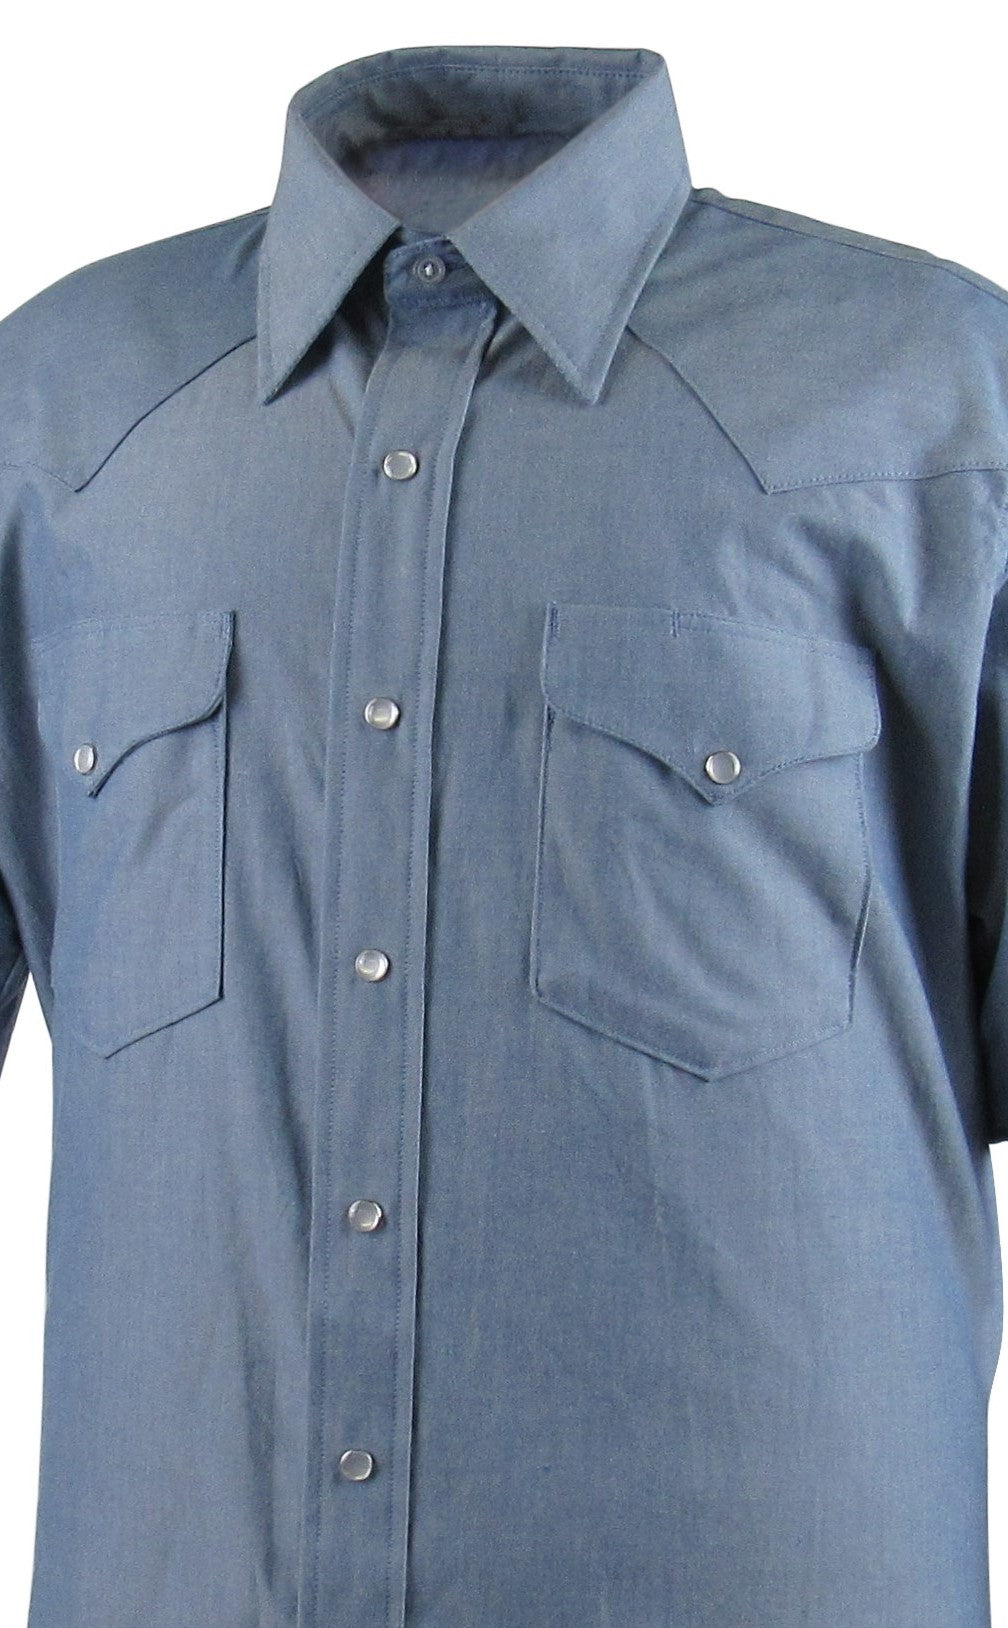 denim blue cotton chambray long sleeve with snaps Flying R Ranchwear Made in USA